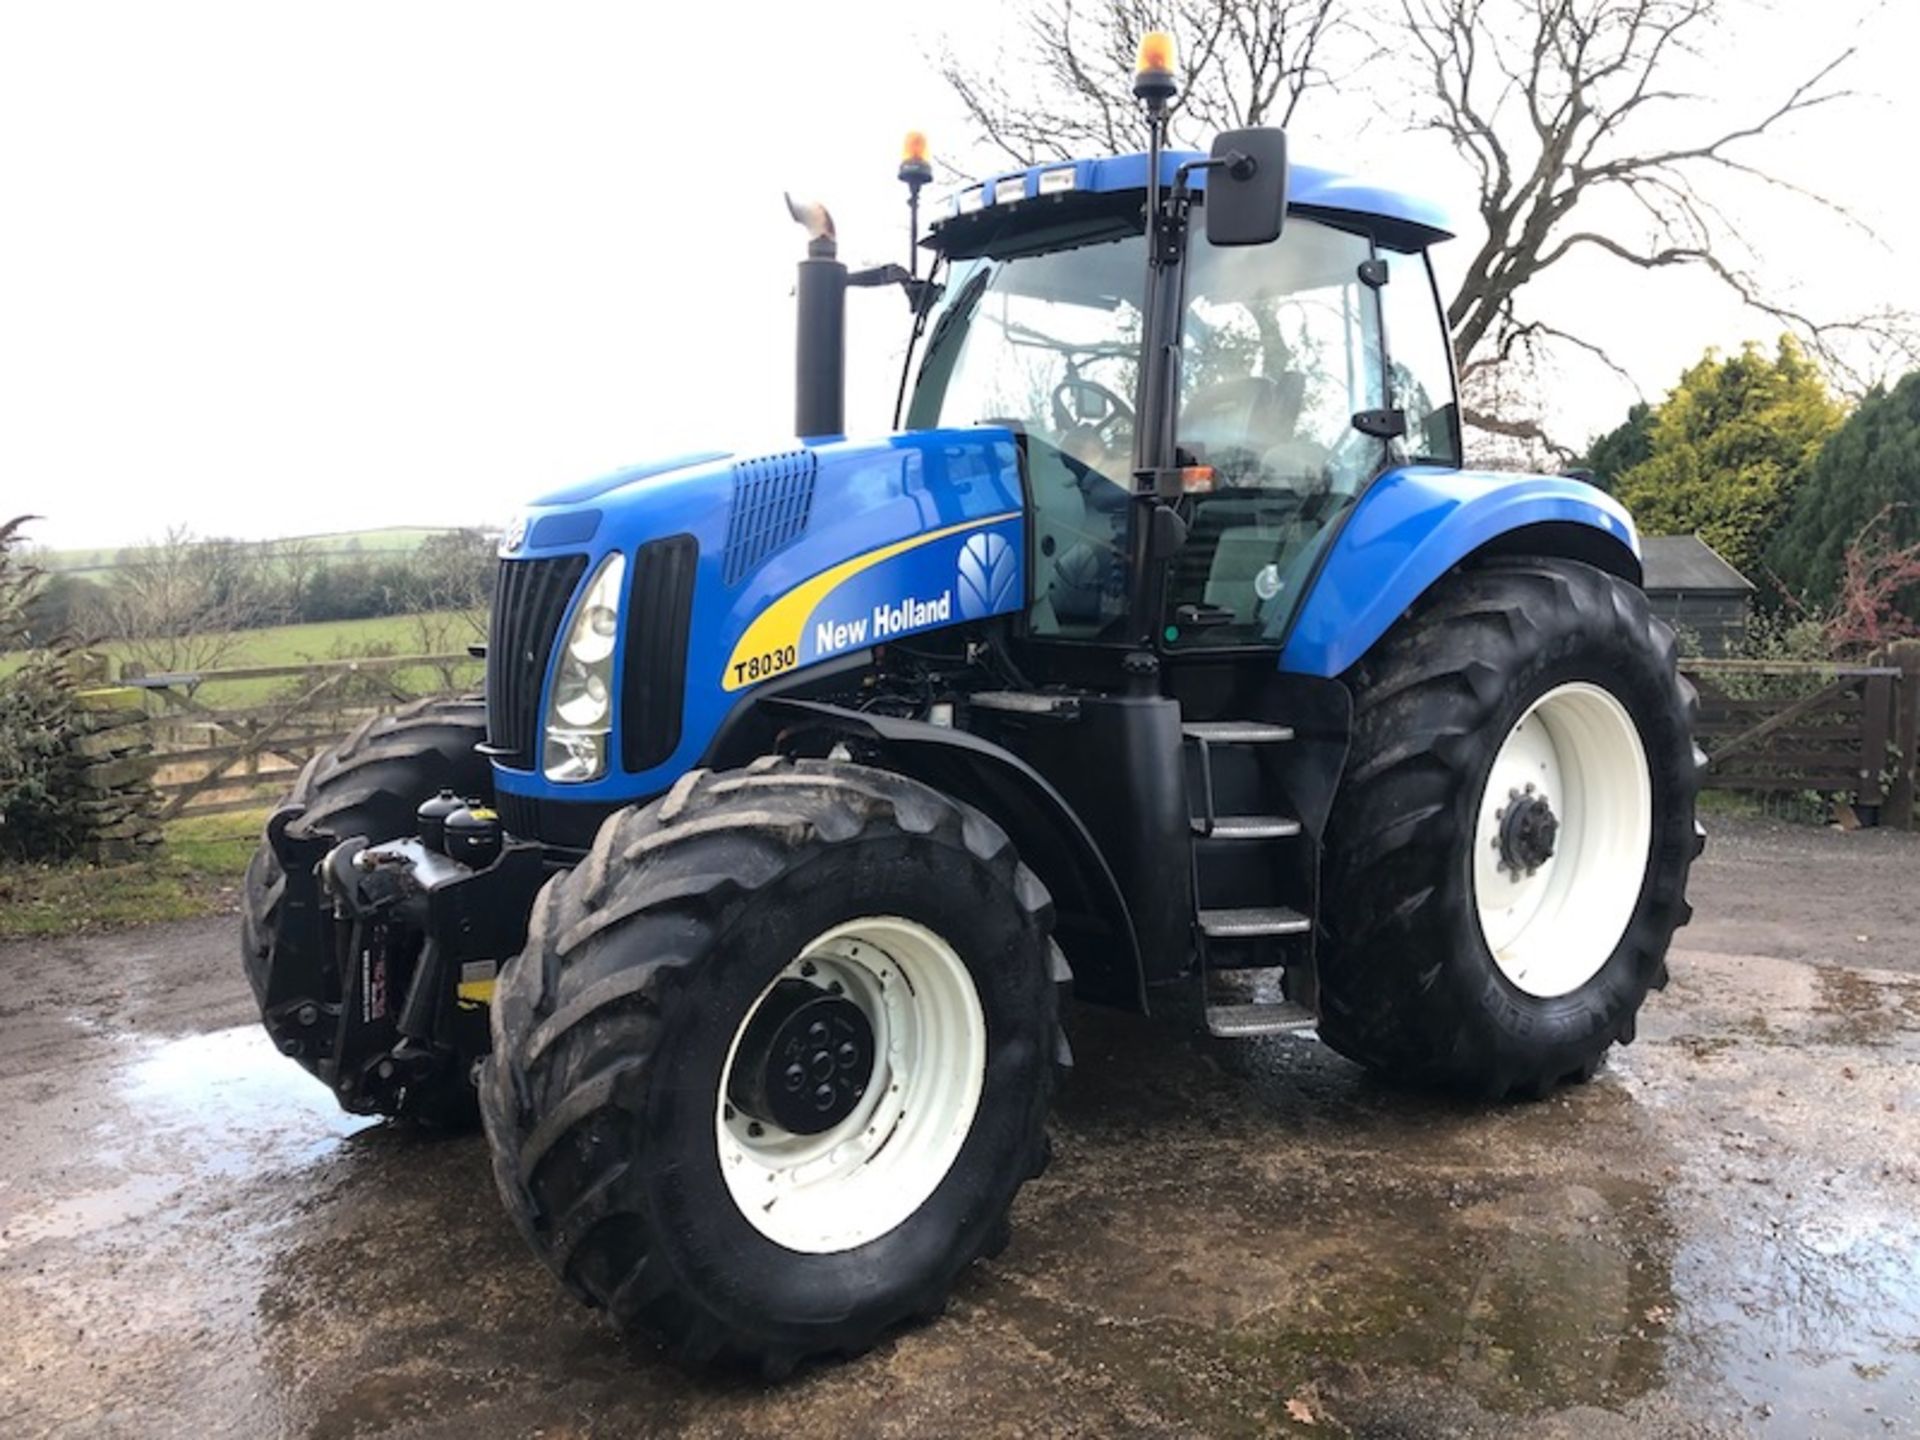 New Holland T8030 Tractor - Image 2 of 17